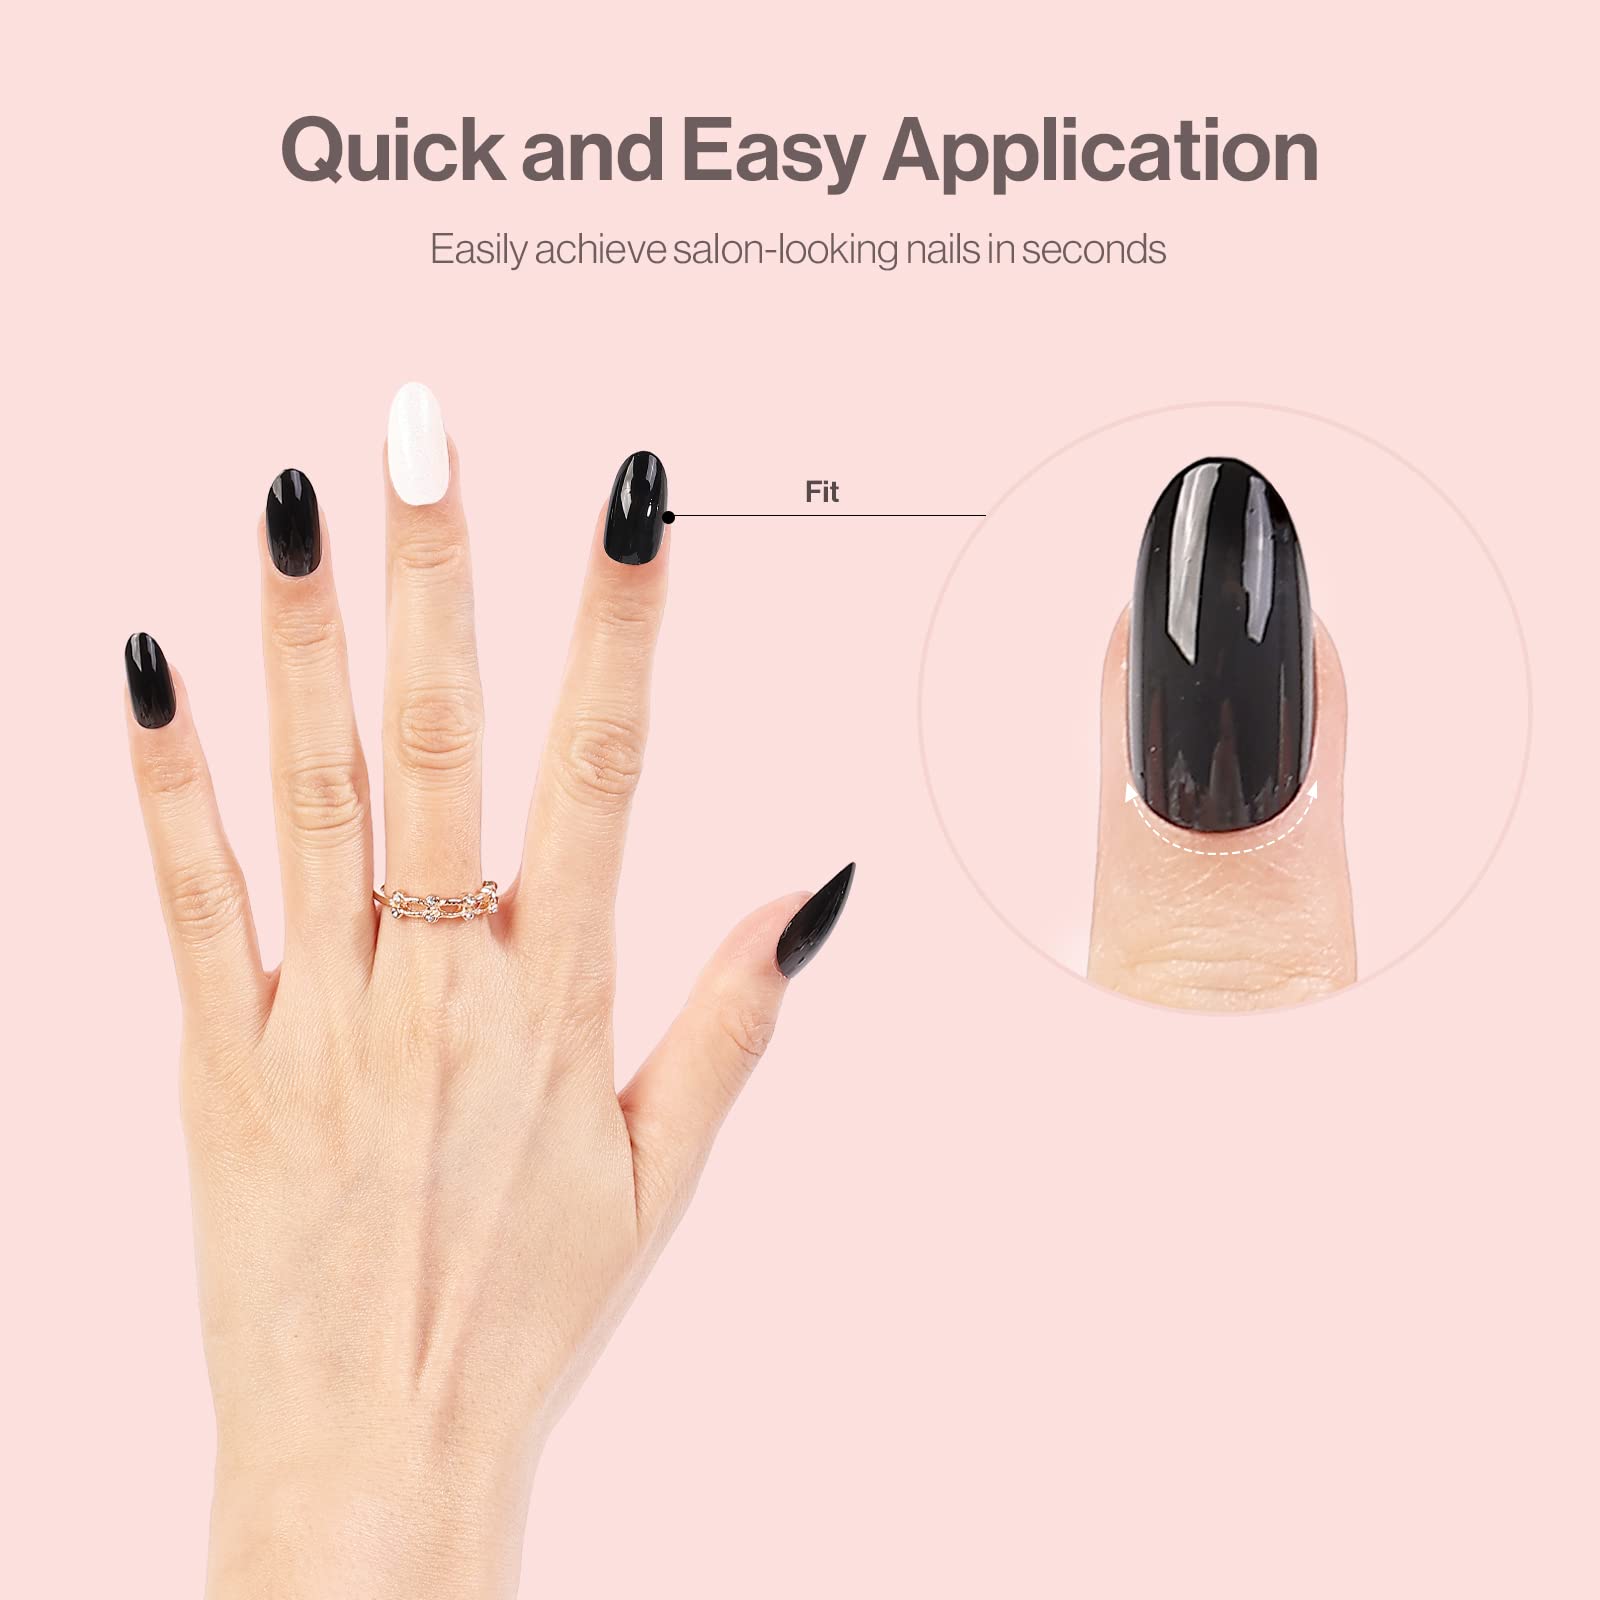 Acrylic Nail Shapes: Find Your Form